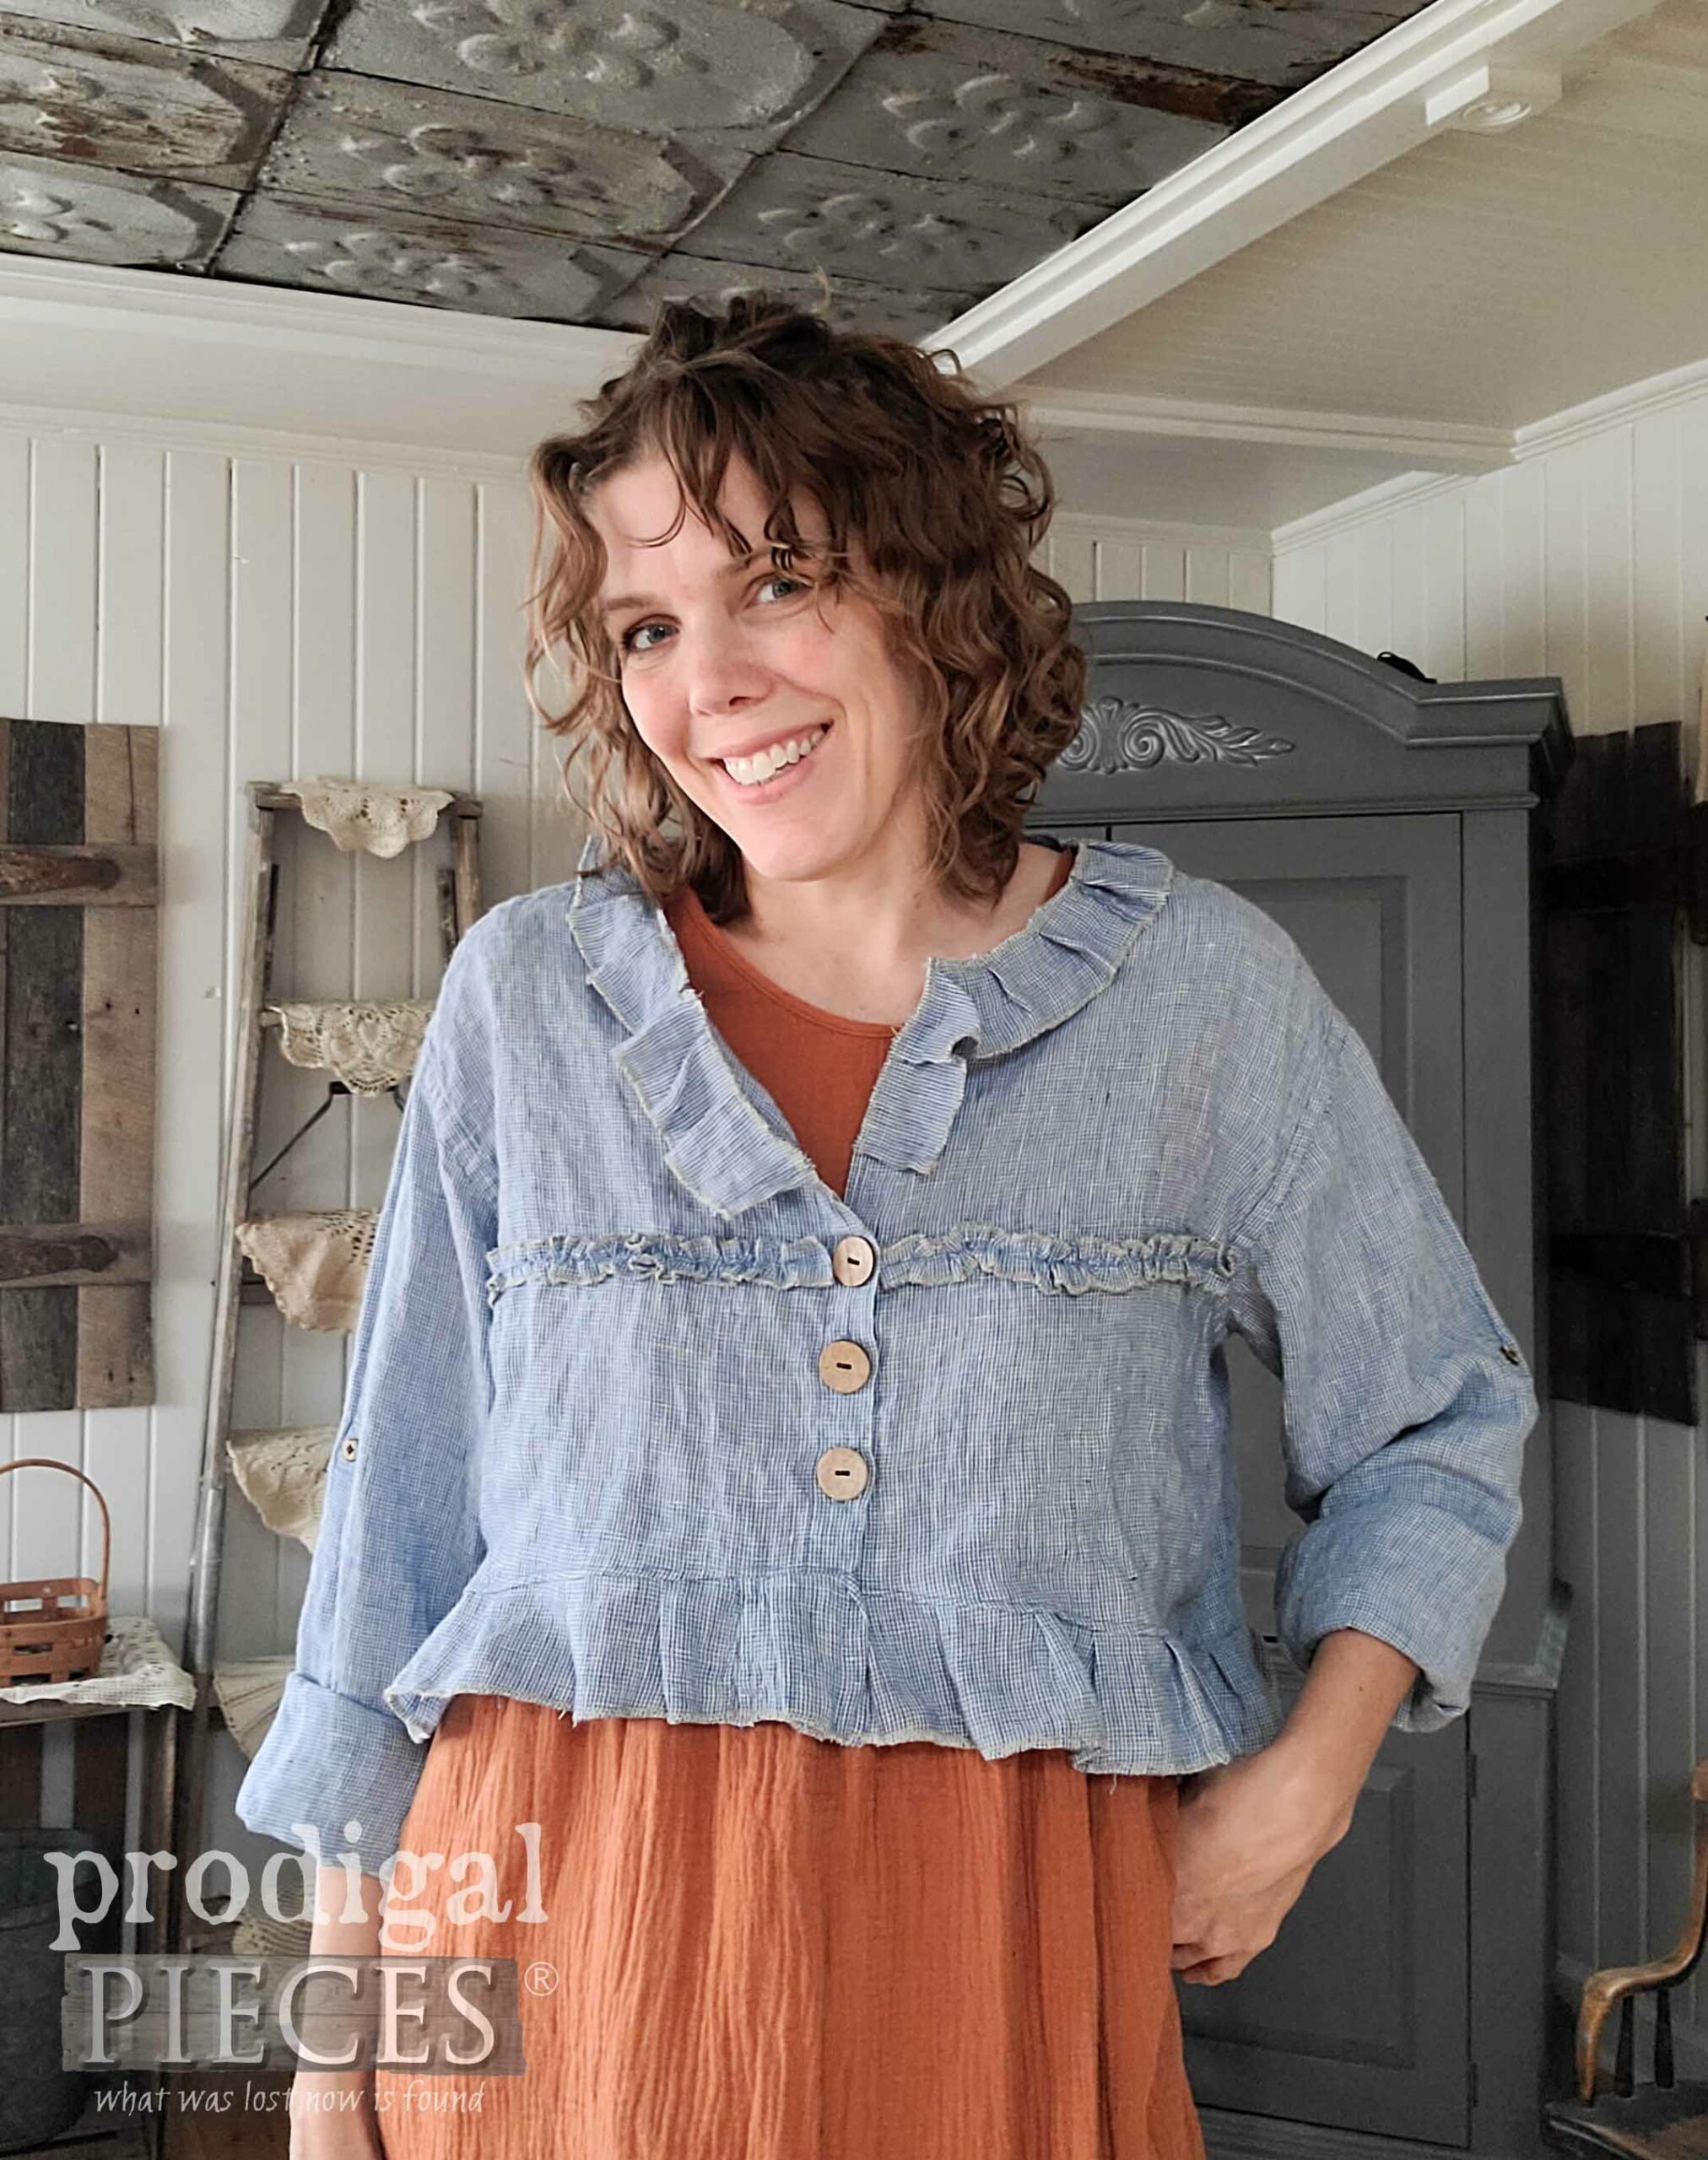 Larissa of Prodigal Pieces in her Refashioned Linen Jacket from a Thrifted Shirt | prodigalpiecesc.om #prodigalpieces #linen #handmade #refashioned #fashion